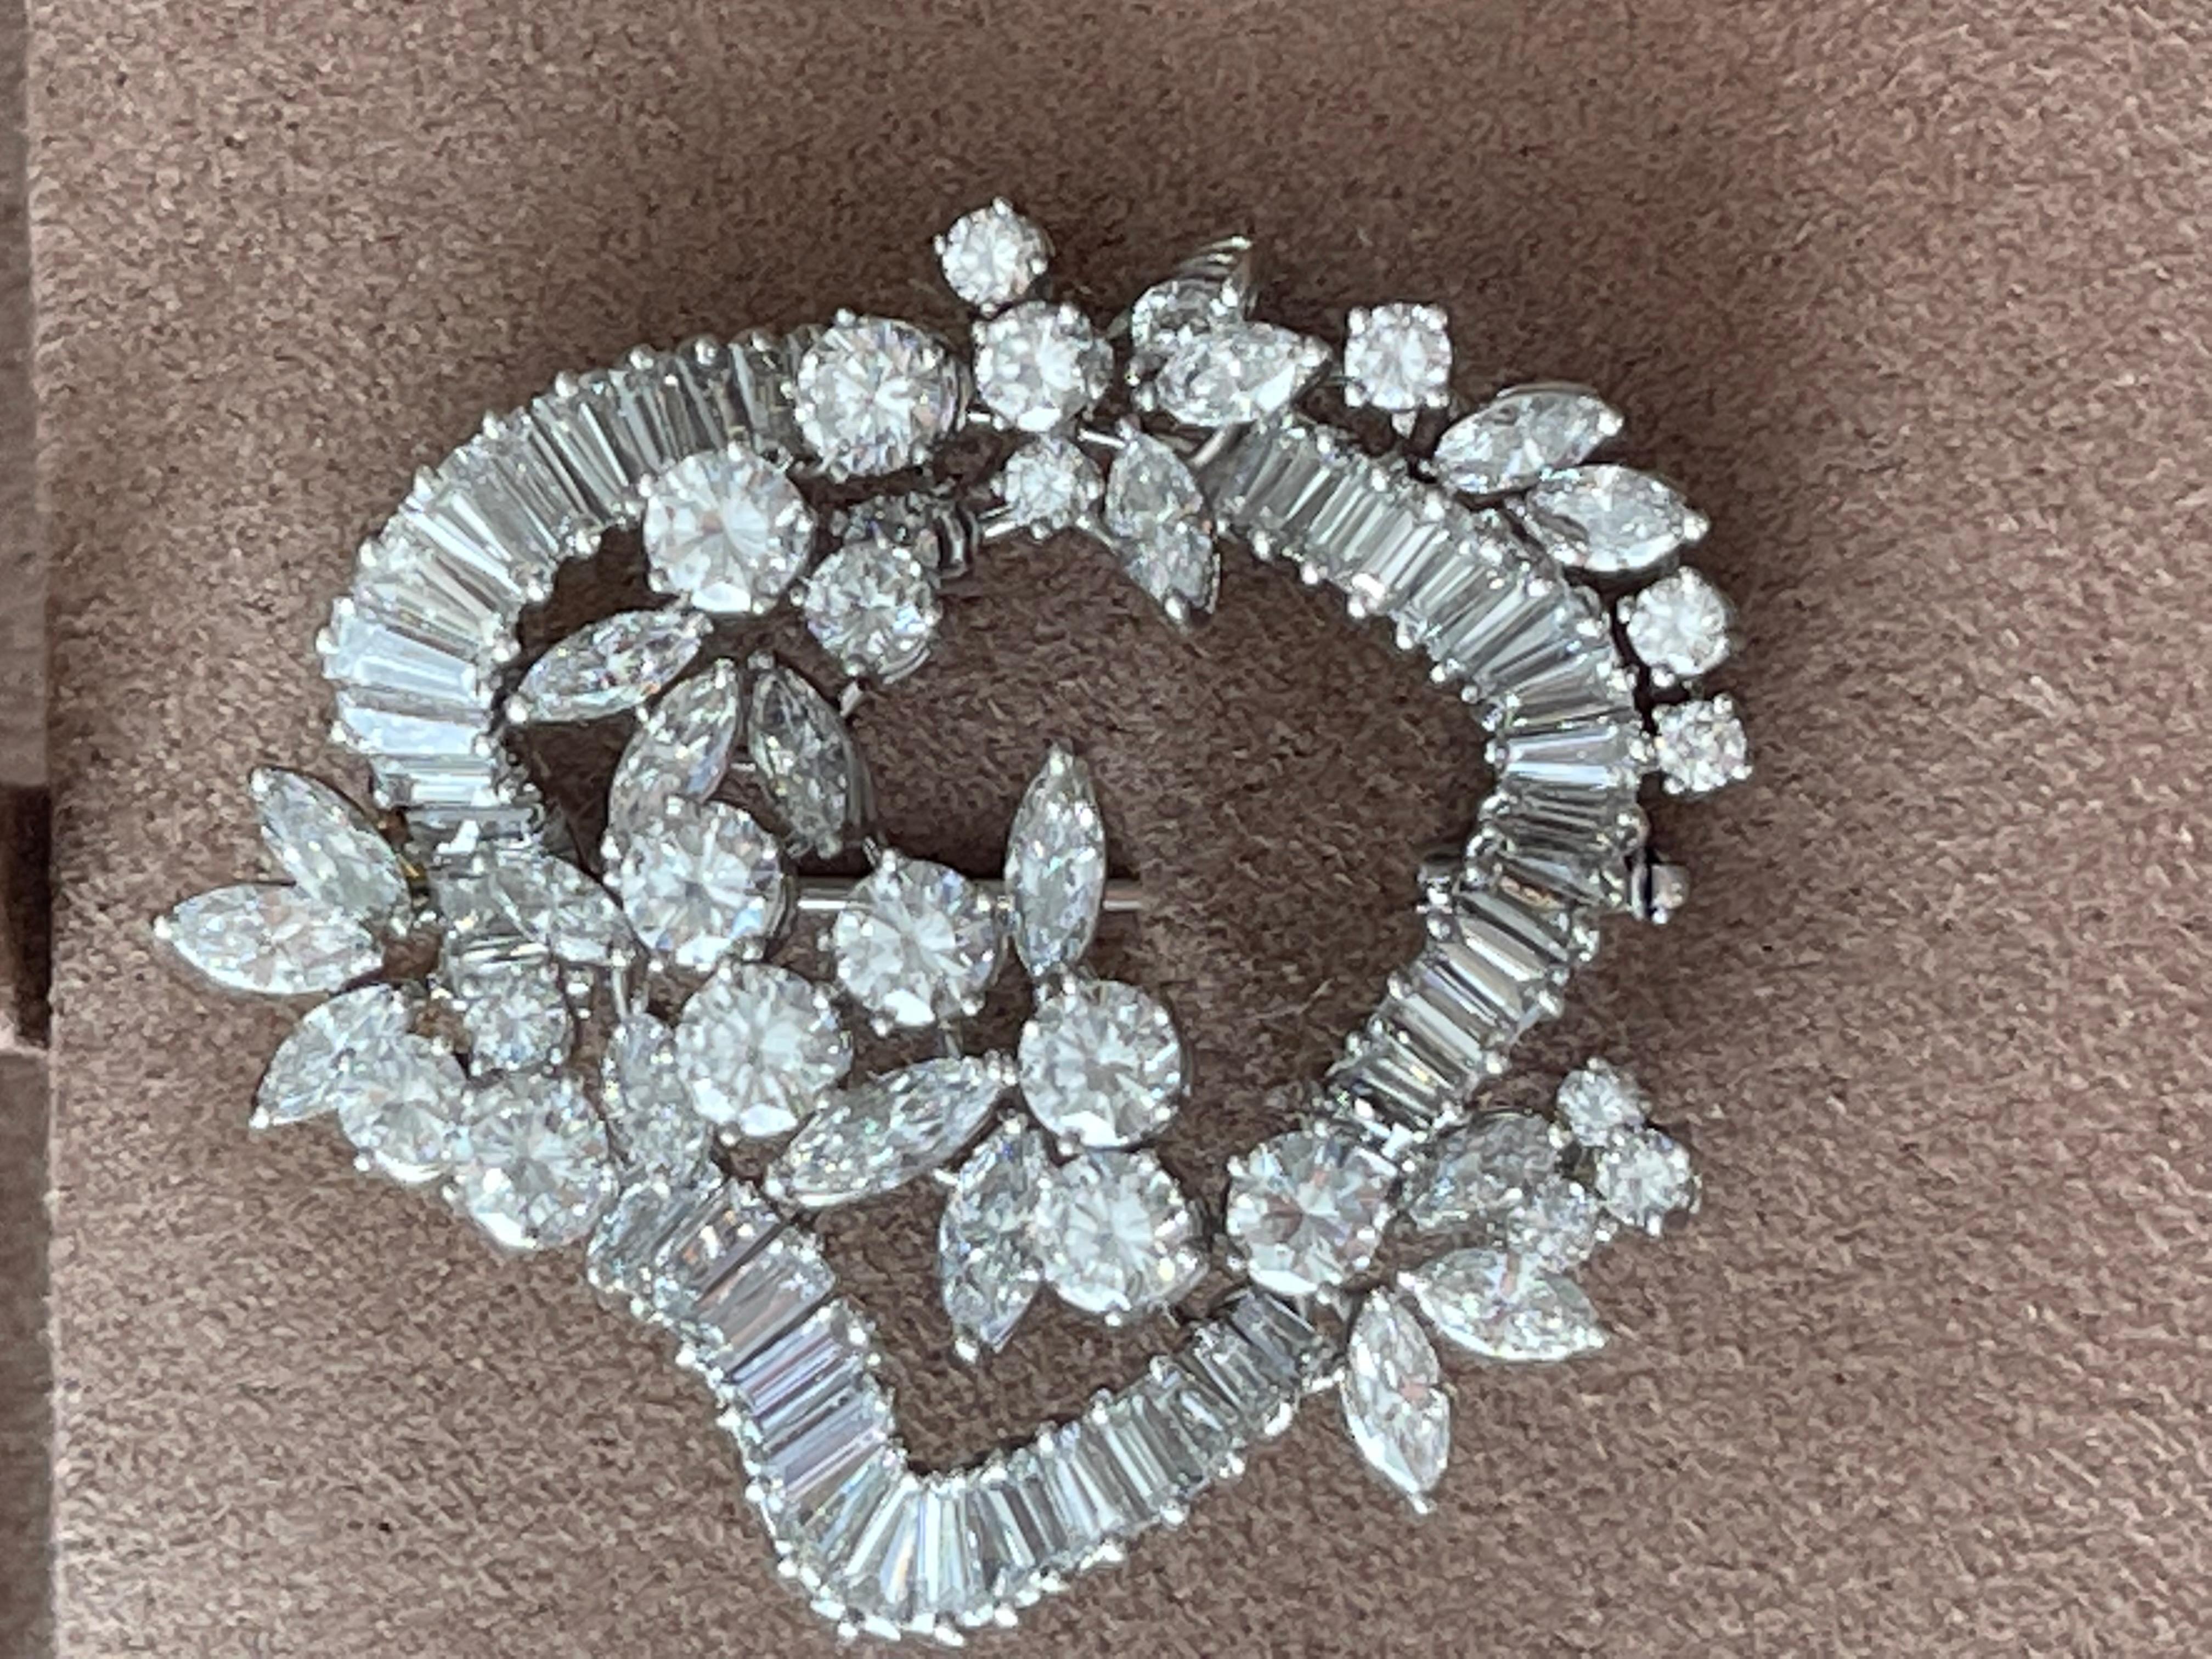 18 K white Gold  brooch featuring brilliant cut Diamonds, Baguette-cut Diamonds and Marquise cut Diamonds in an organic cluster design typical for the 1970. 
No pictures can do justice to this shiny and attractive item, but once it’s on, it is hard